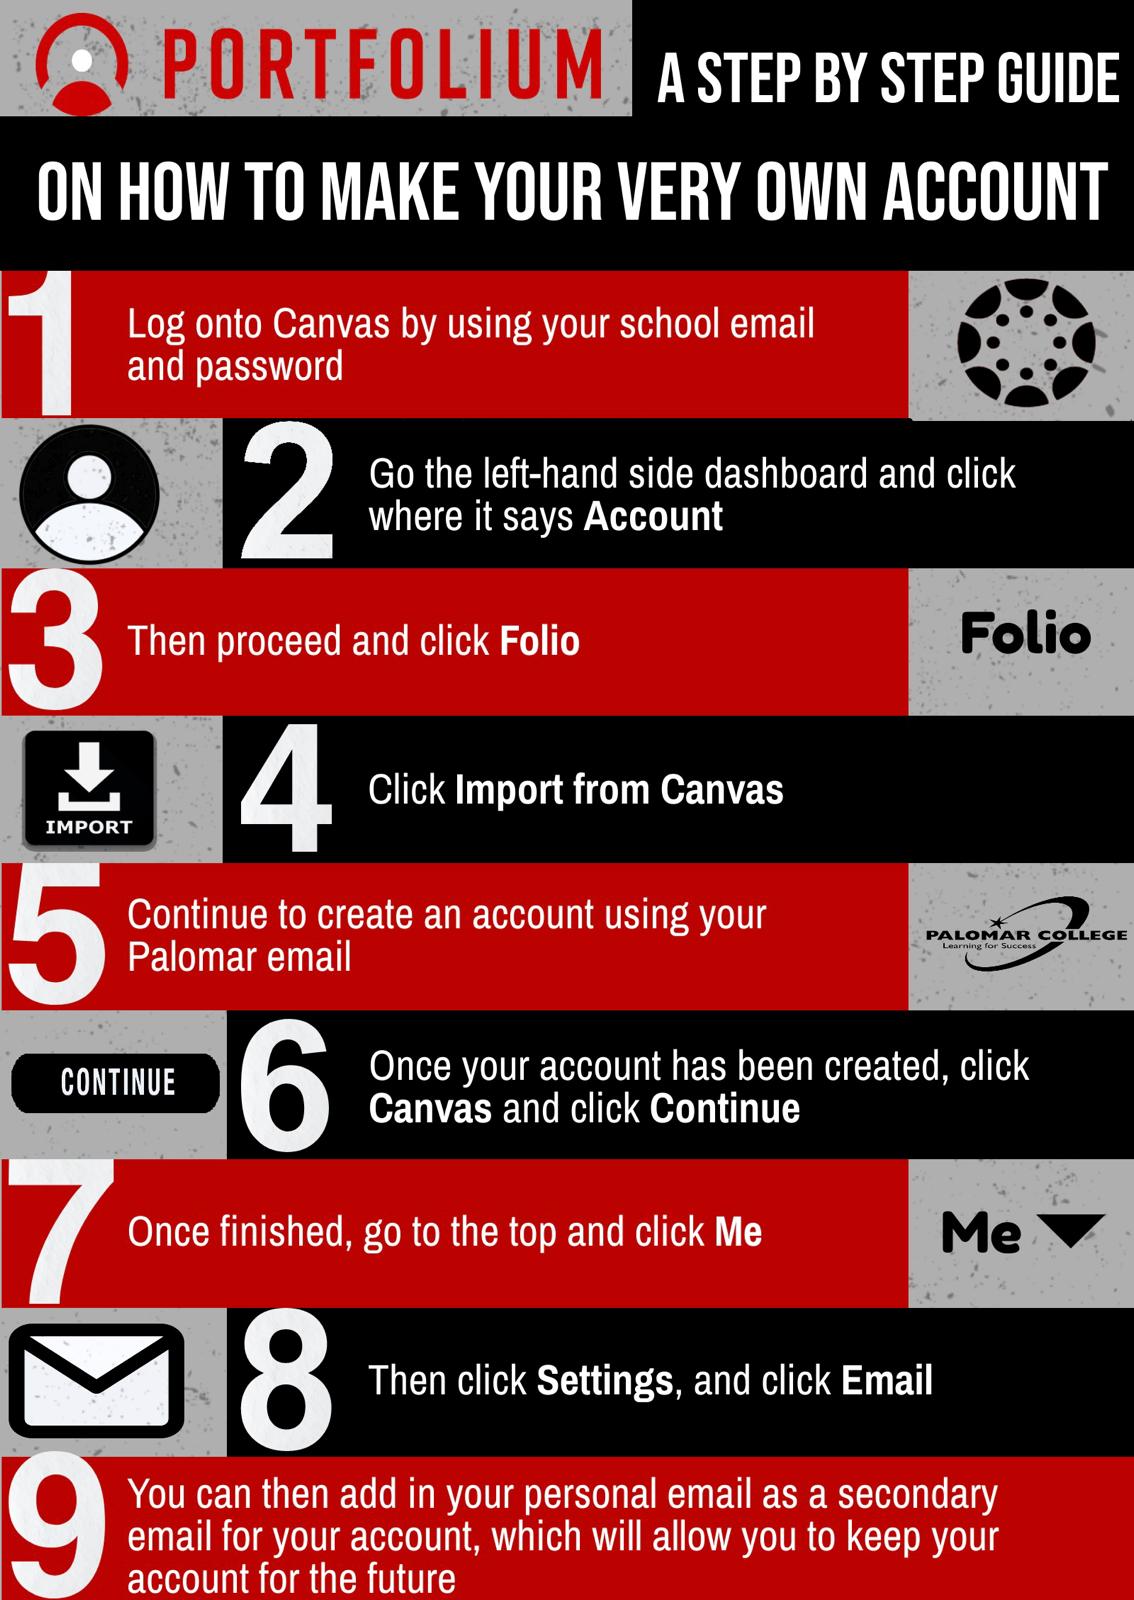 infographic with steps on how to create a Portfolium account through Canvas